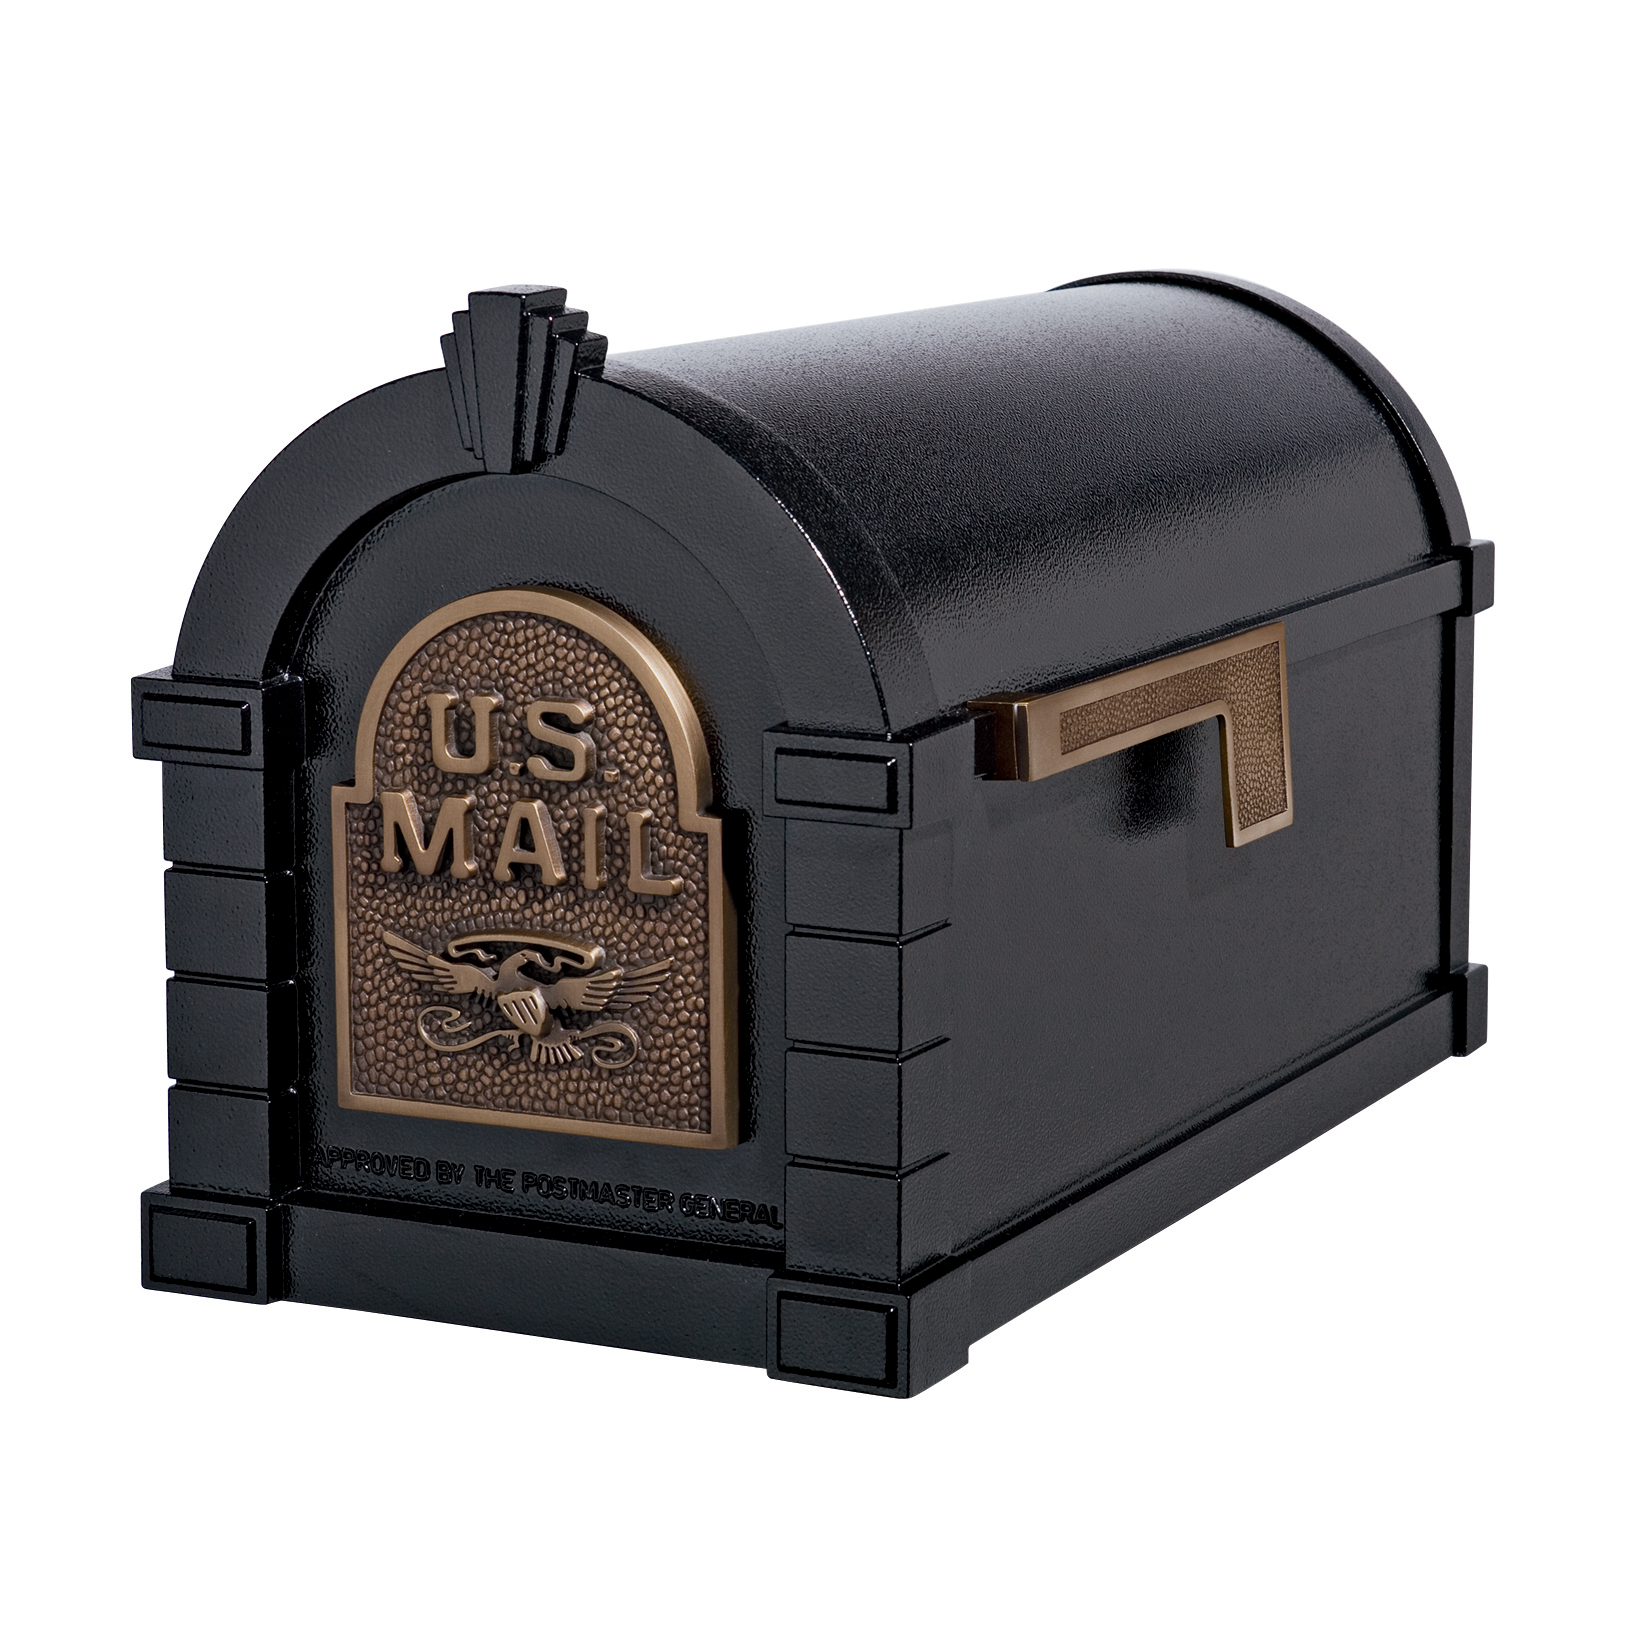 Gaines Eagle Keystone Mailboxes - Black with Antique Bronze